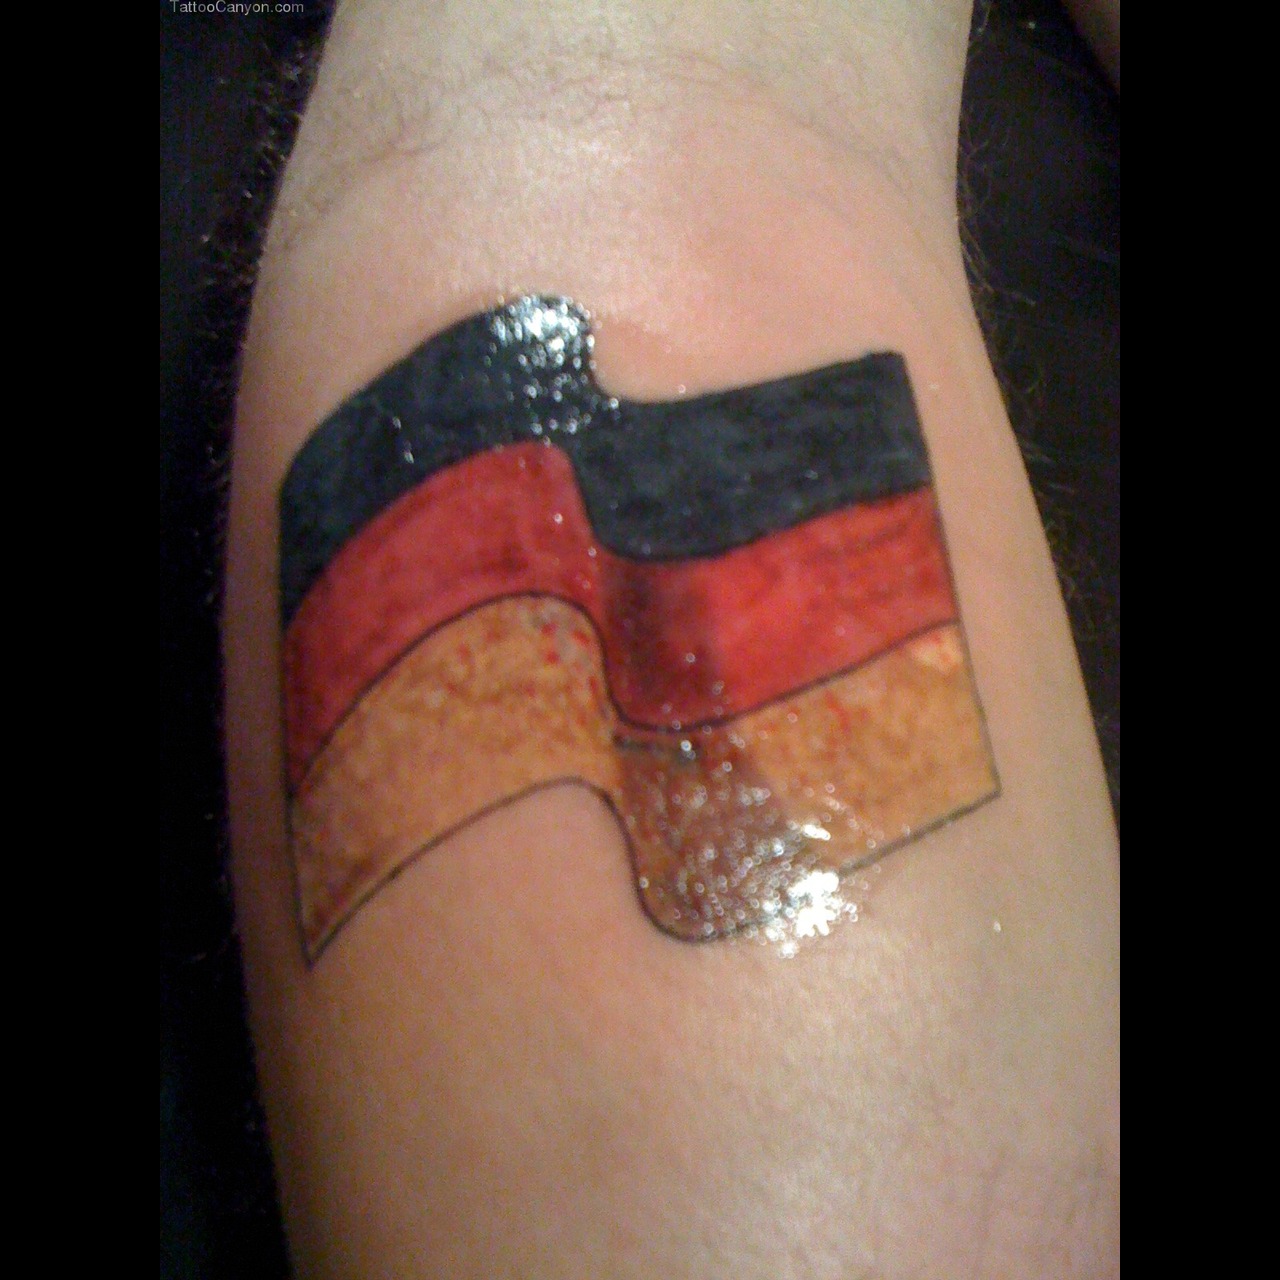 German tattoos with meaning